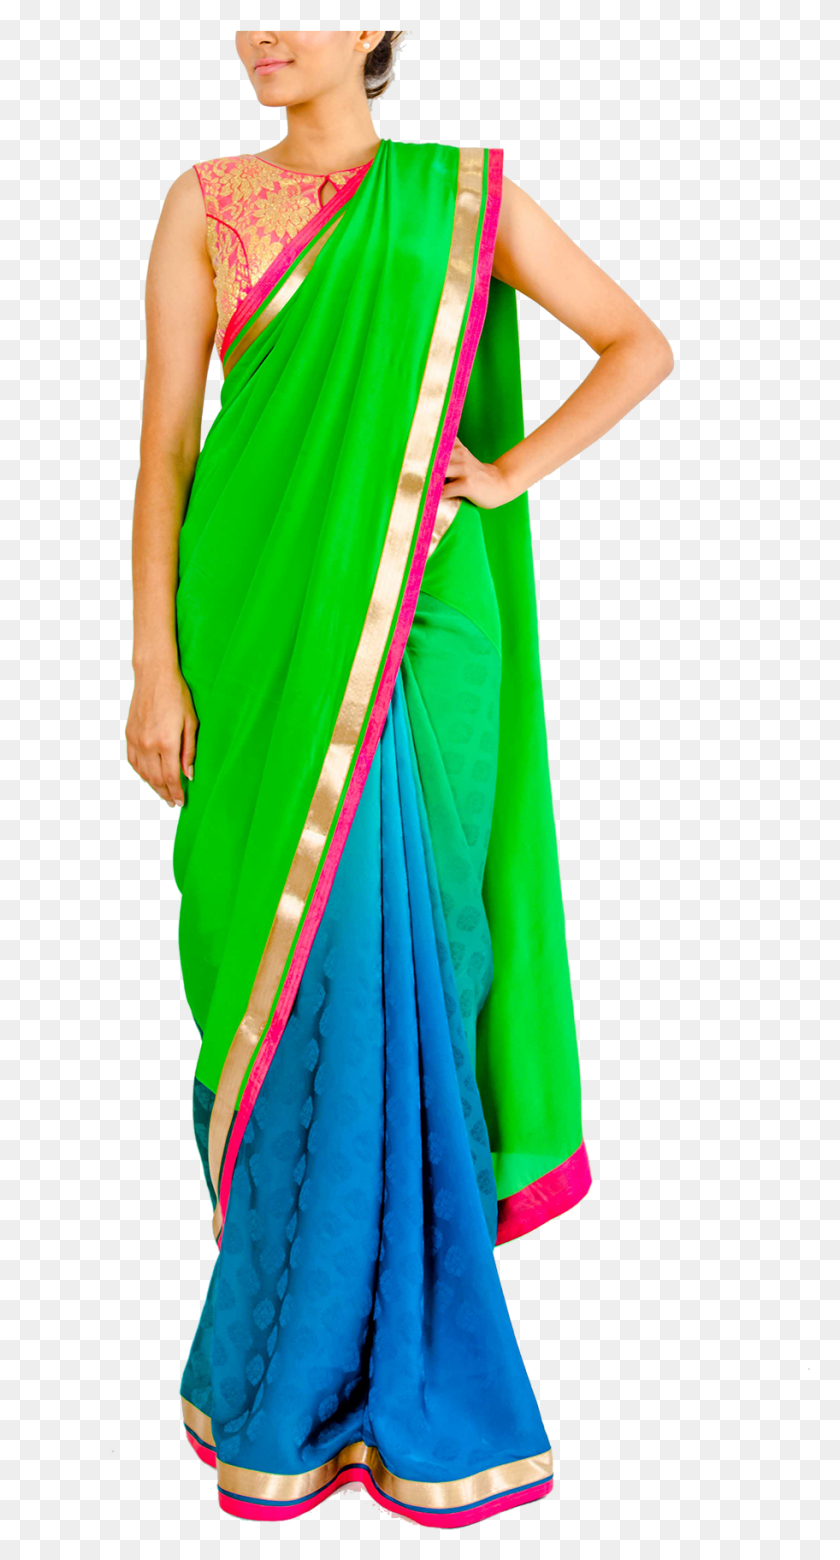 912x1755 Green And Blue Shaded Half And Half Saree By Stylease Sari, Clothing, Apparel, Silk Descargar Hd Png